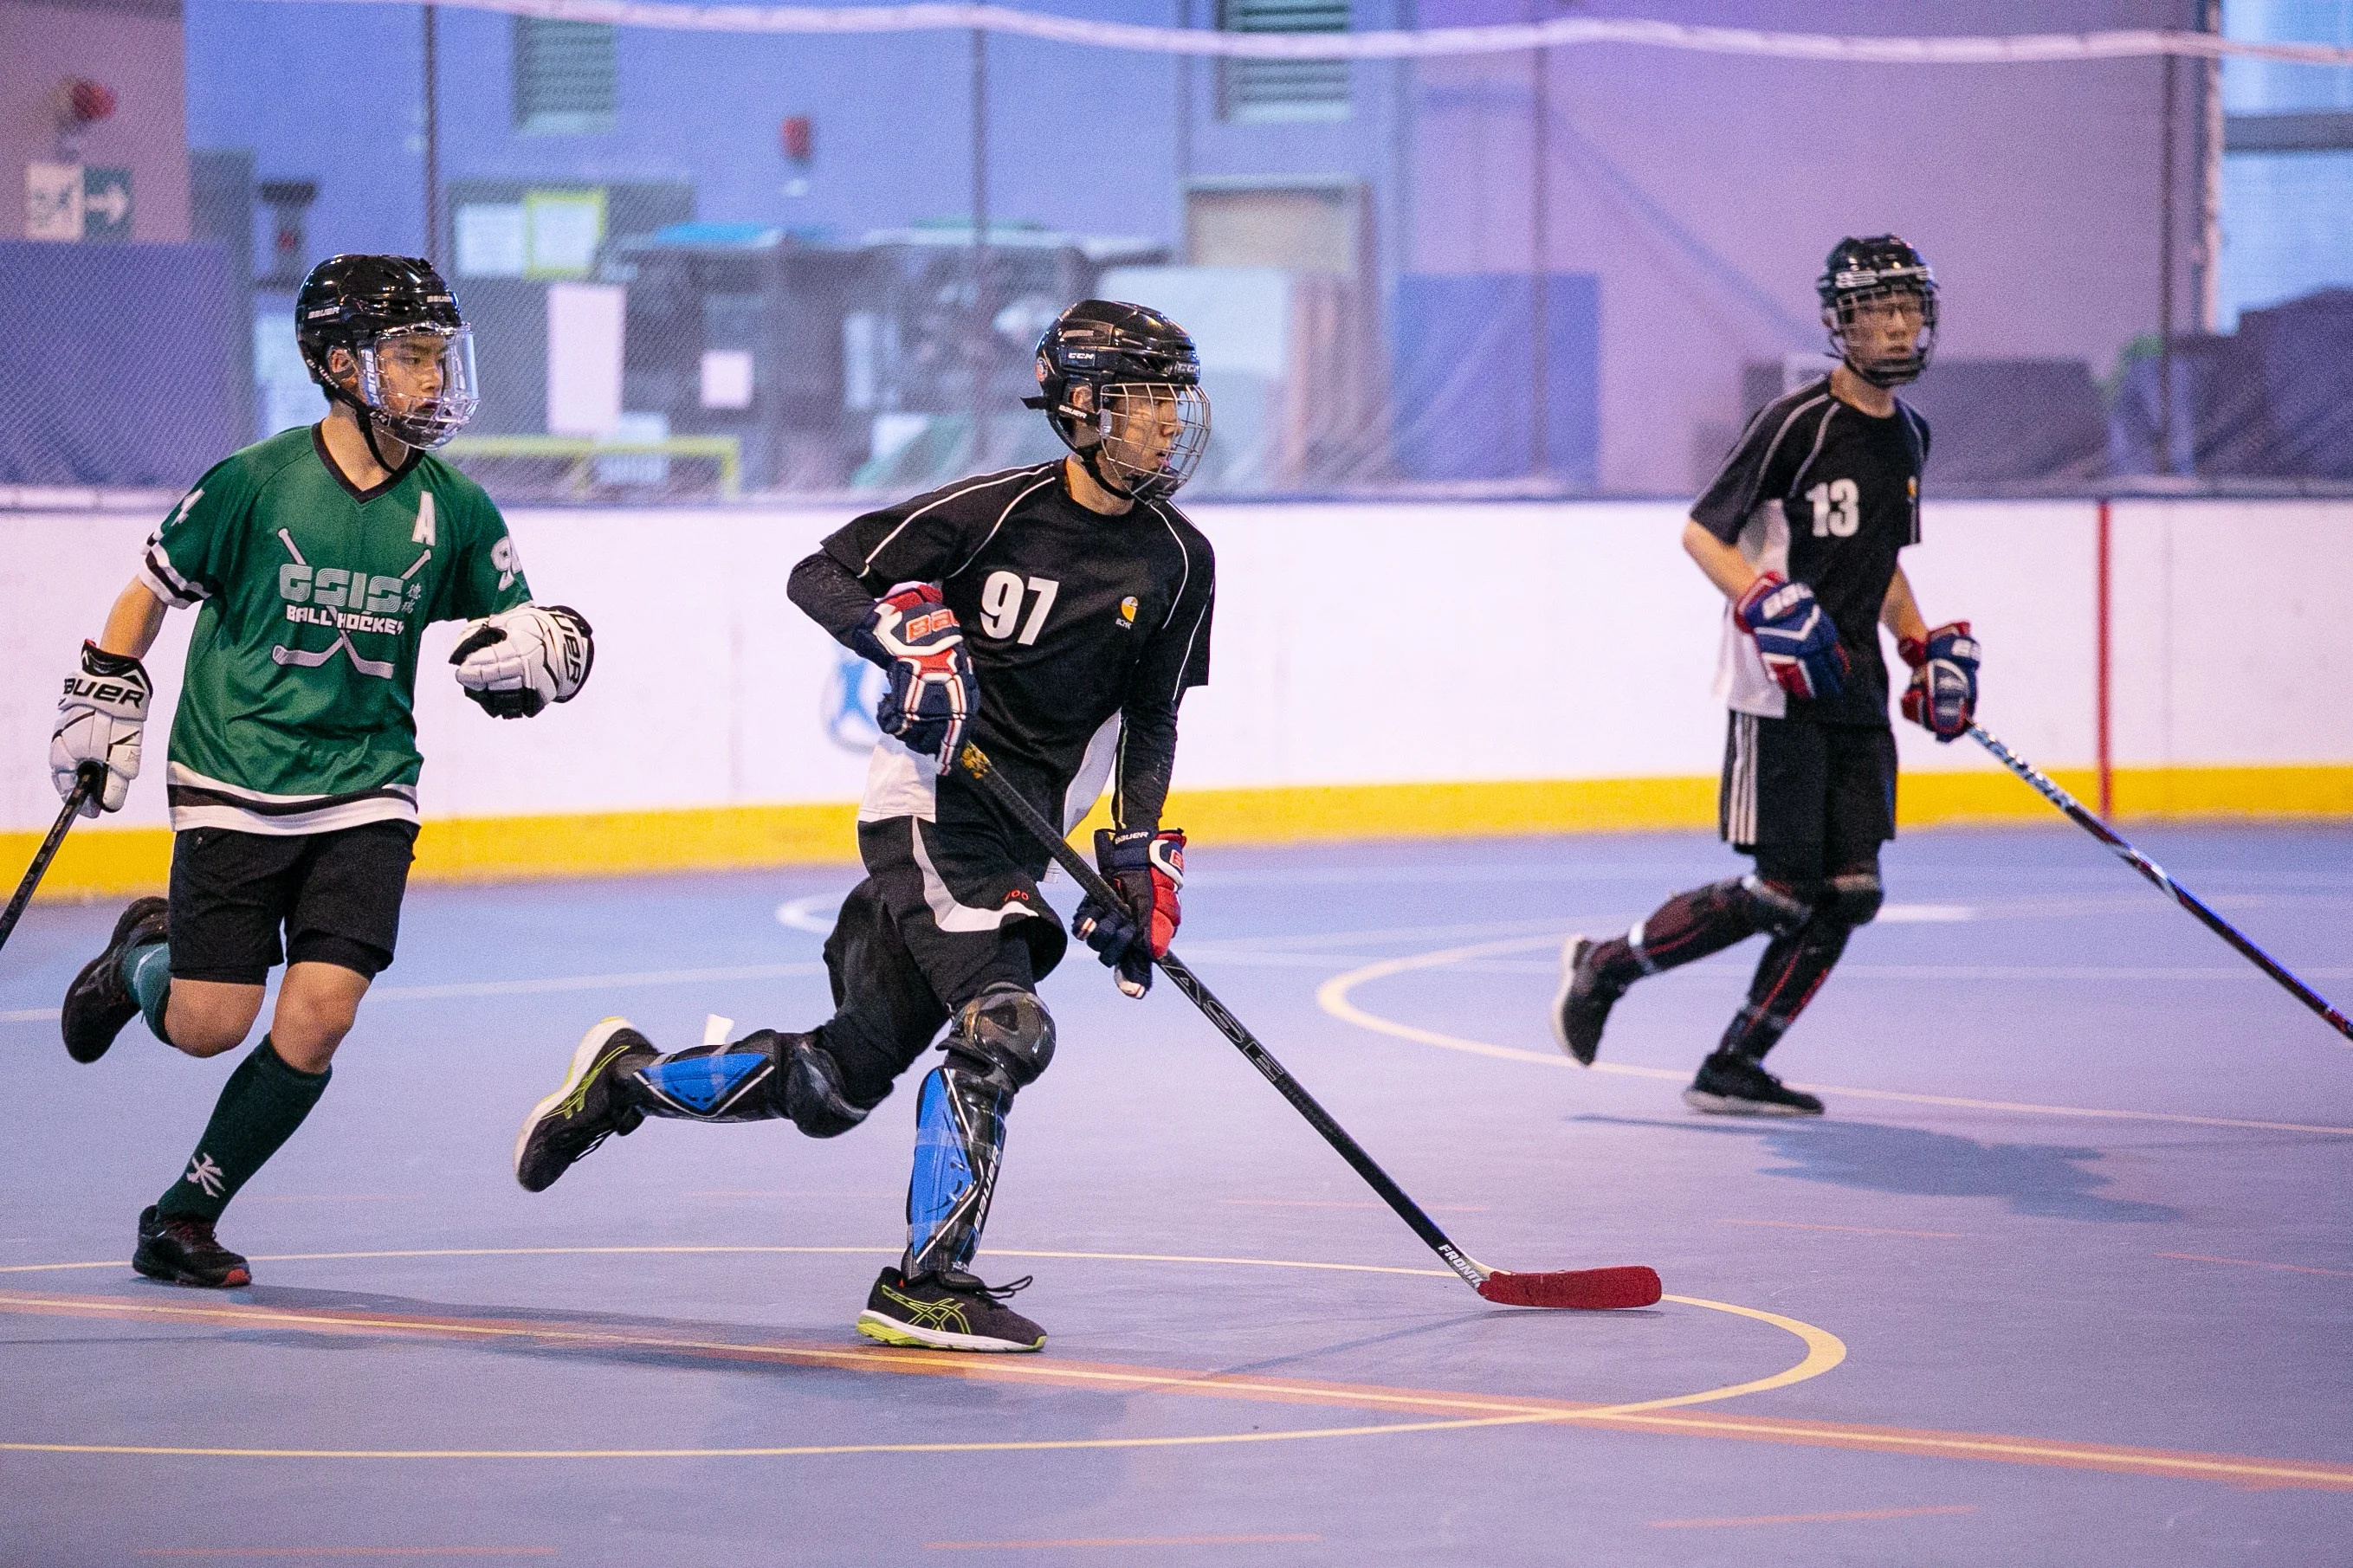 Ball Hockey: Renaissance College, Marco Yan, Player and Coach, Ice Hockey in the US, Hockey Team. 2720x1820 HD Background.